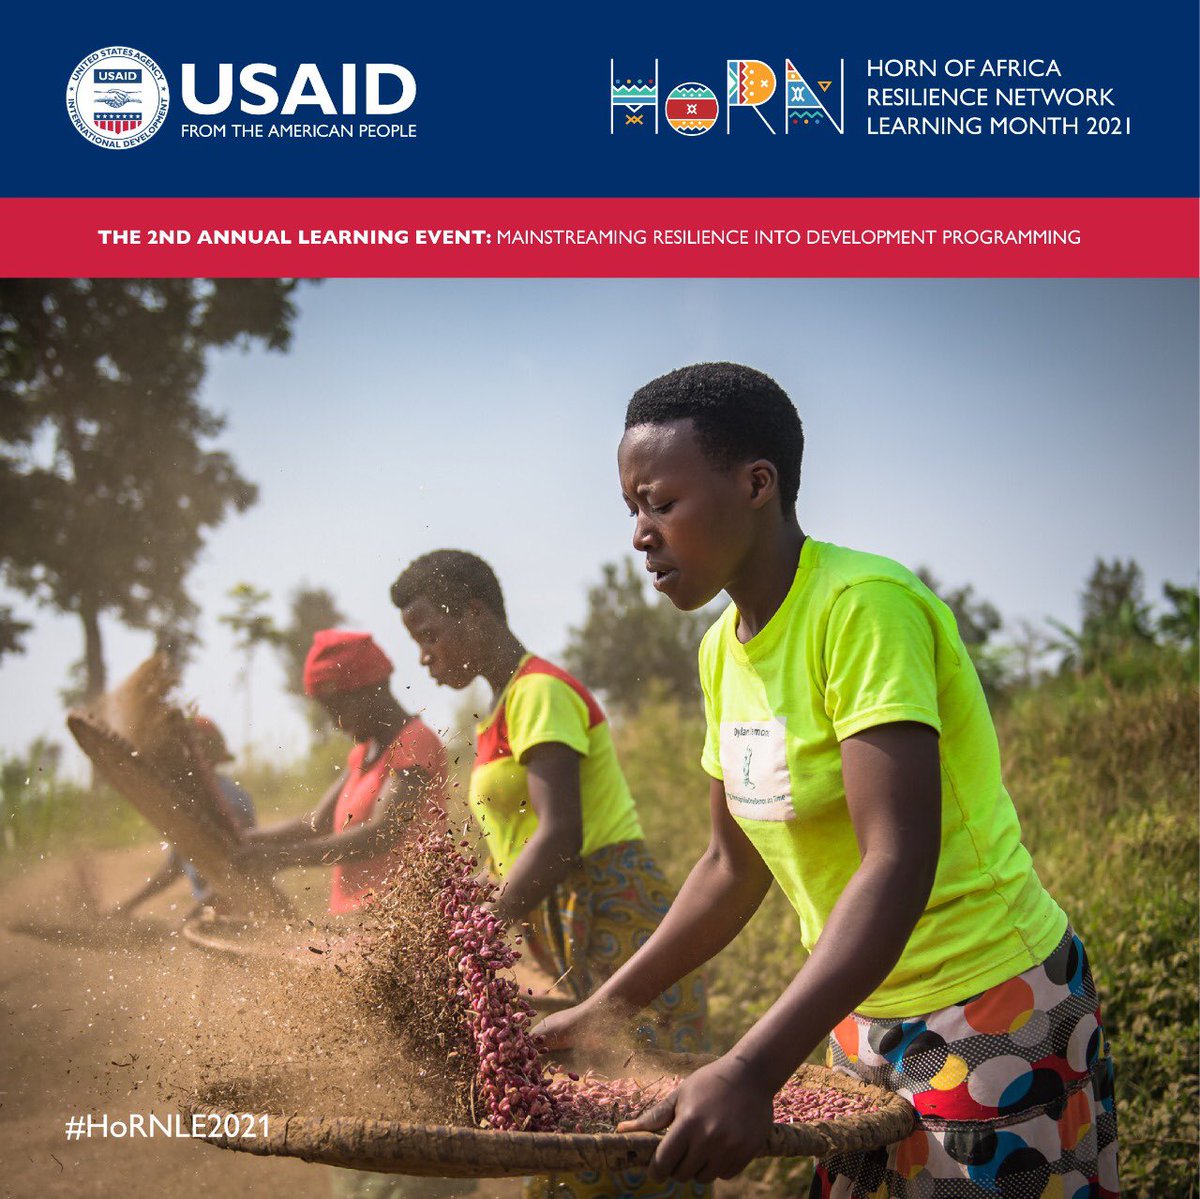 I’m hearing refugees & community members have received training through the USAID-funded Graduating to Resilience program on improved agricultural practices, business development, and financial management

It’s now safe to say #USAIDTransforms

#HoRNLE2021 @USAIDEastAfrica